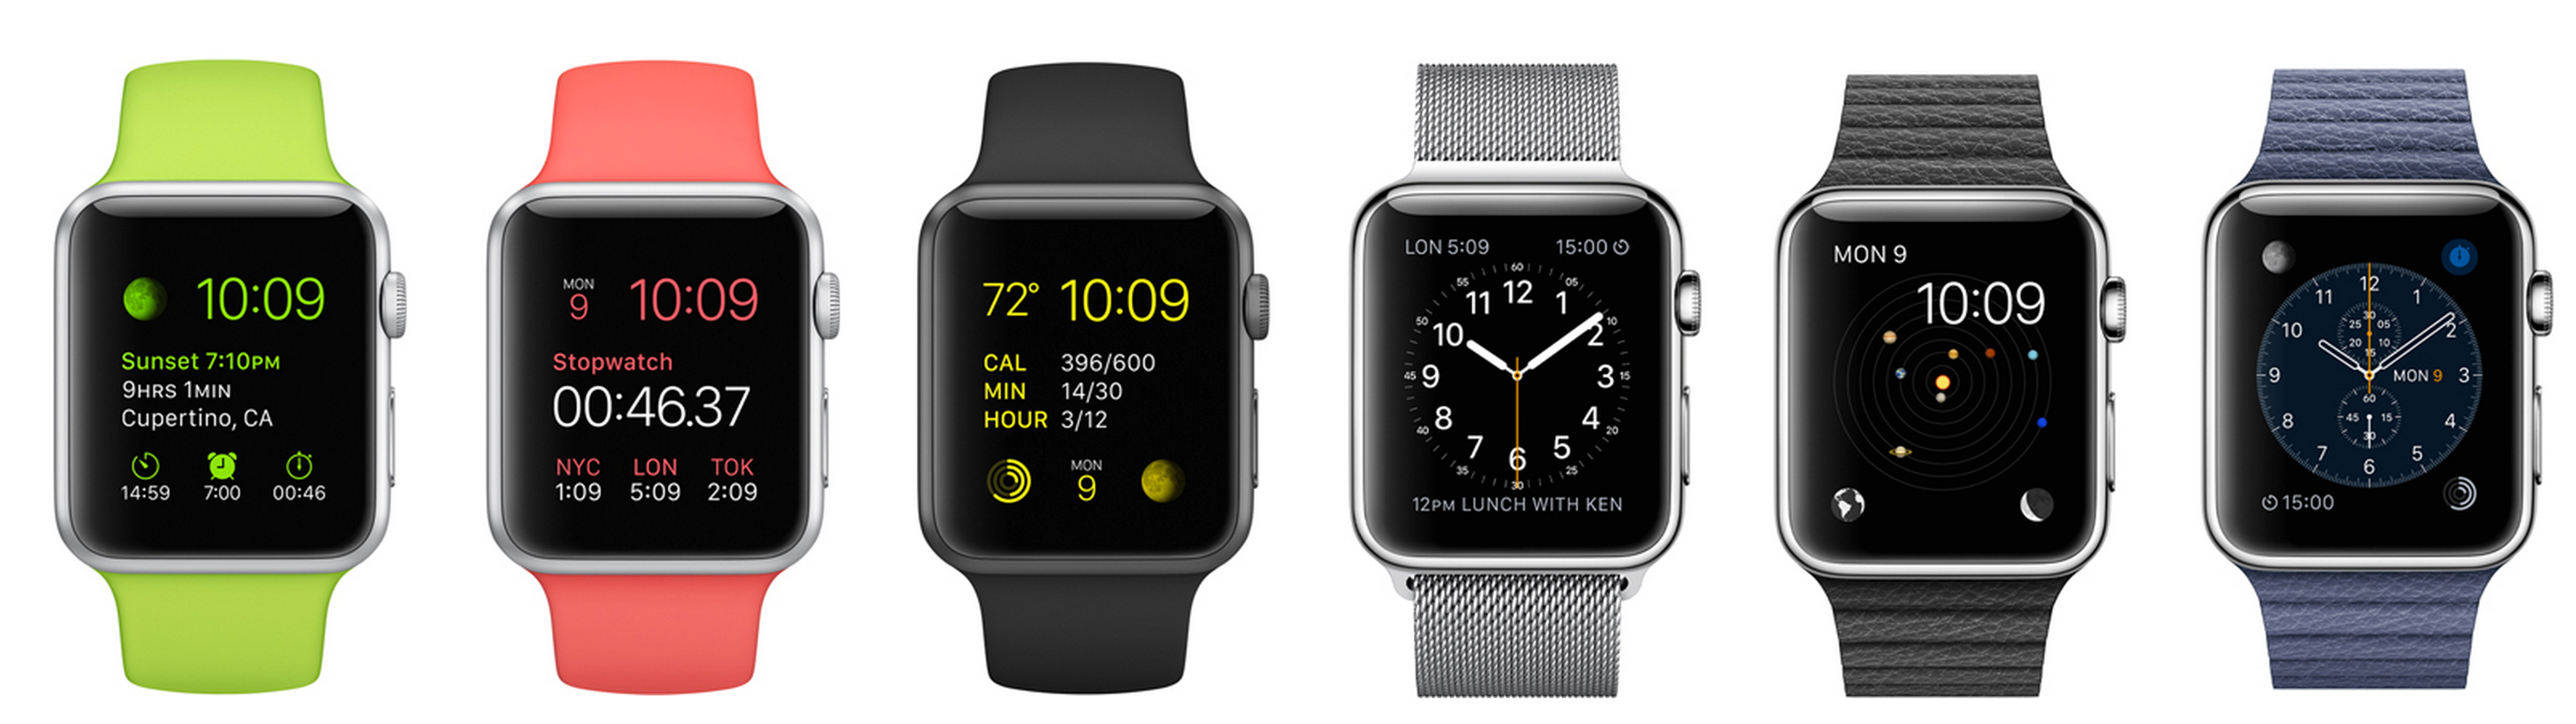 Inconvenient Truths About The Apple Watch By Mike Rundle Medium